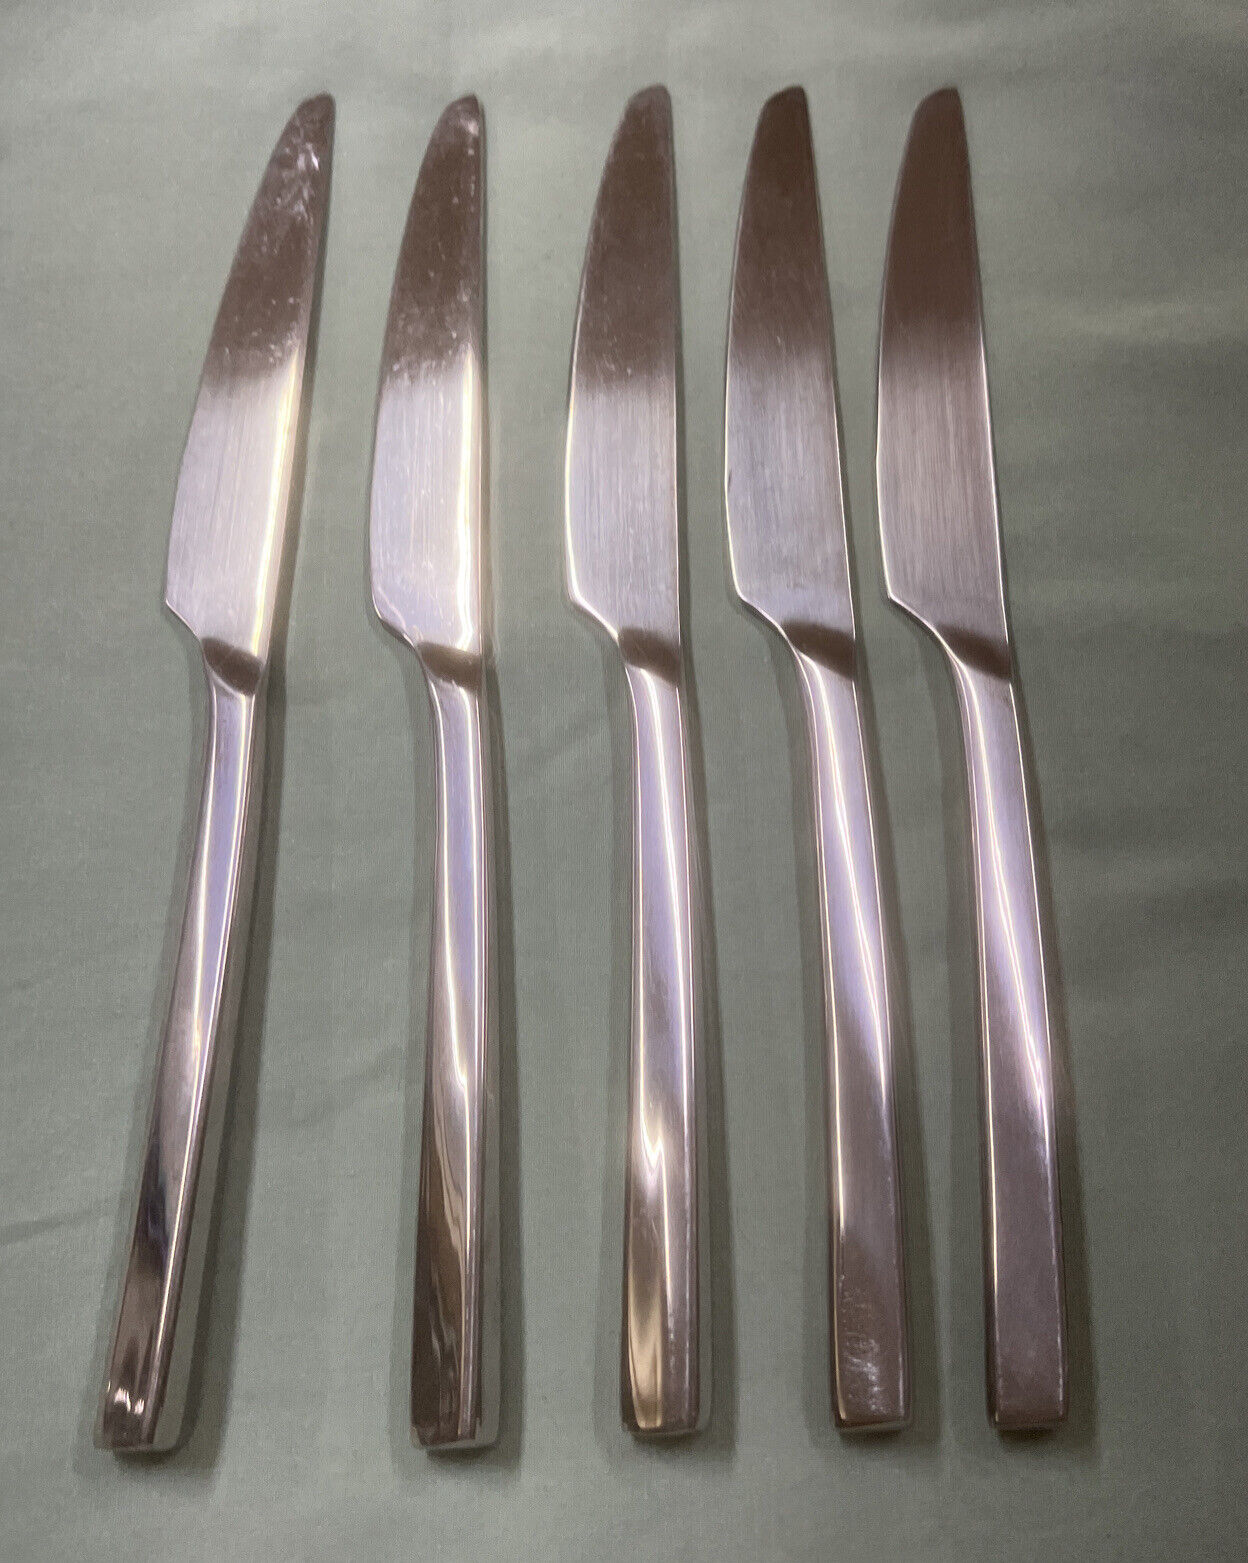 5 Towle Luxor Stainless Dinner Knives Triangular Handle